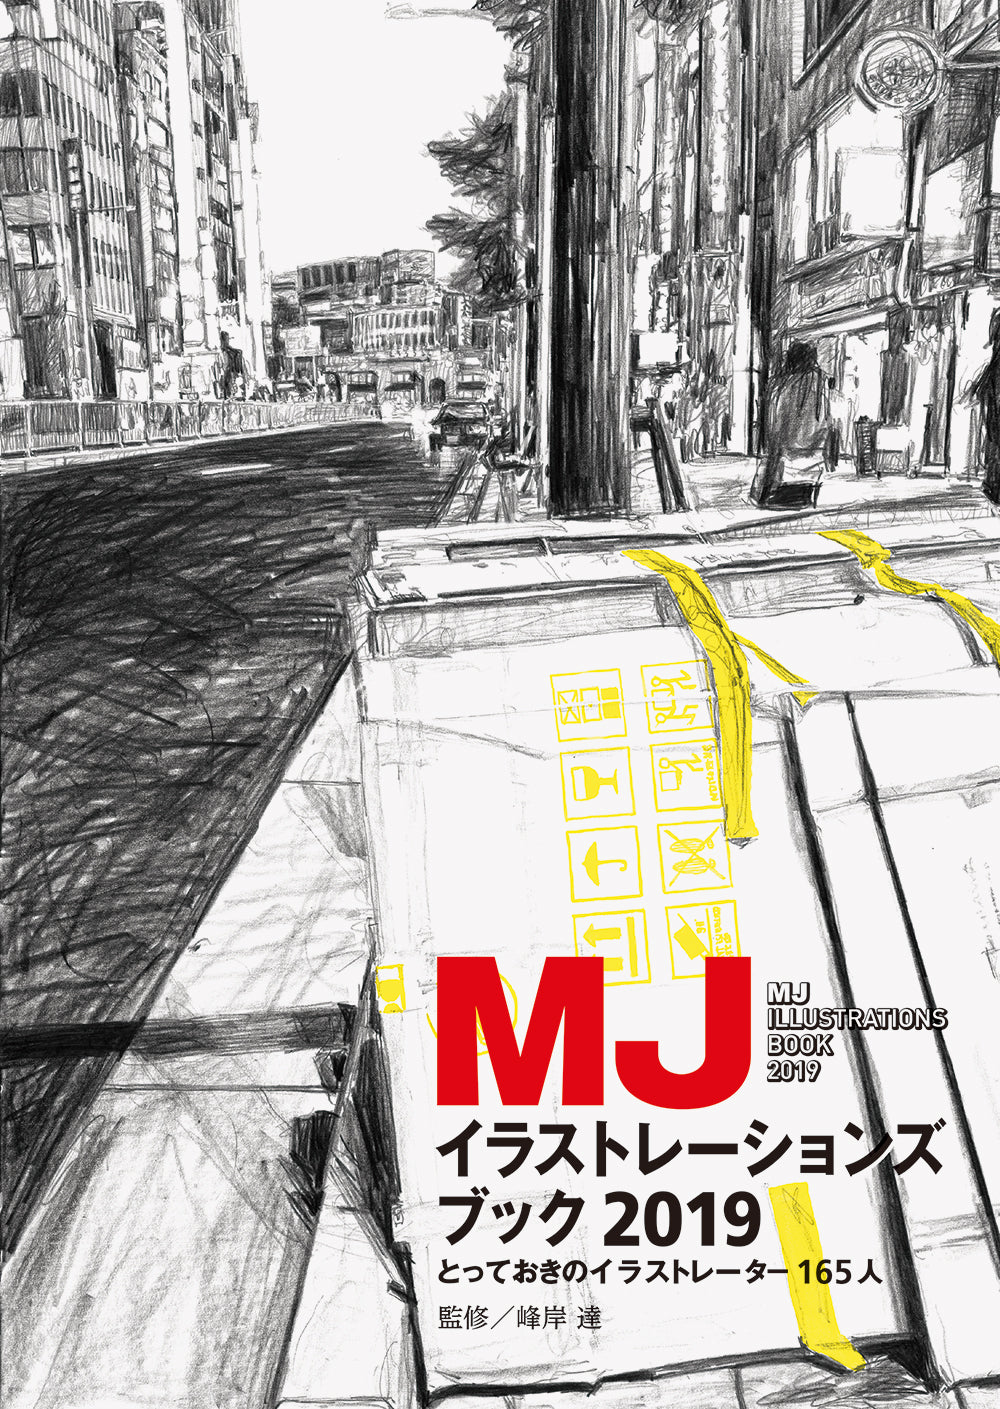 MJ Illustration Book 2019 (Japanese only, mostly visual) cover